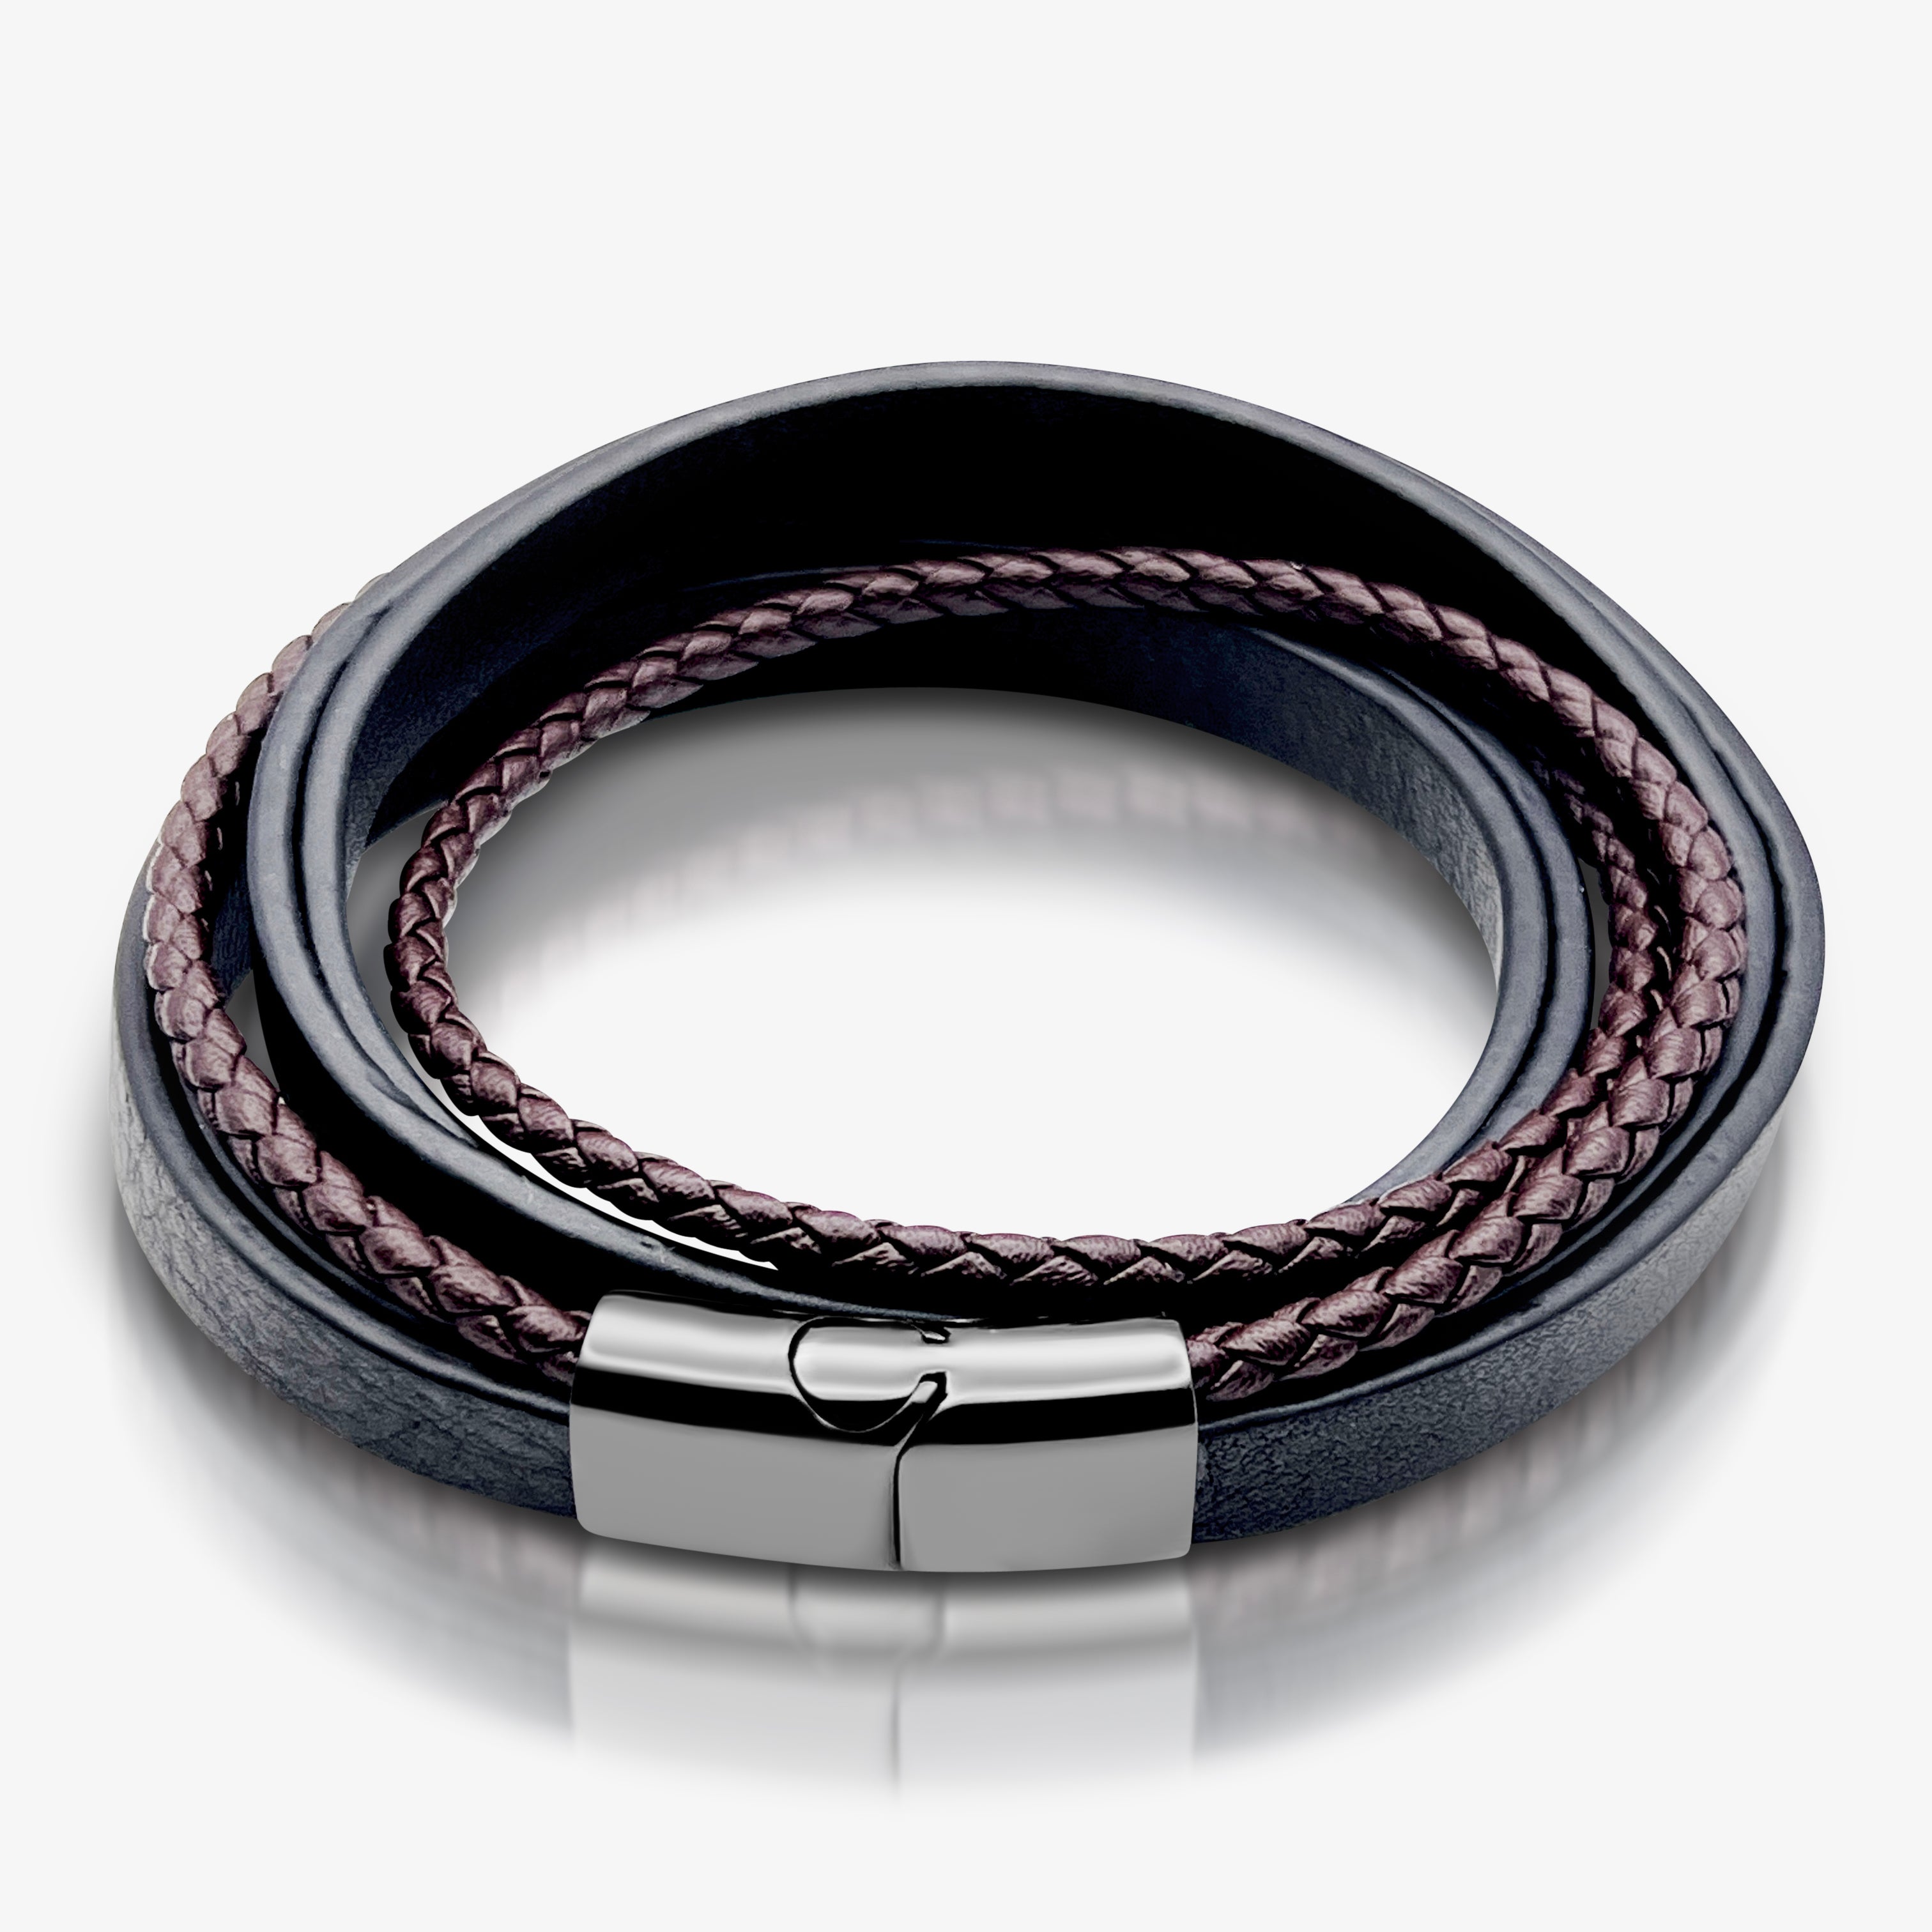 To my Man I Will Choose You Over And Over - Premium Stainless Steel Italian Leather Braided Two-Tone Layer Bracelet for Men